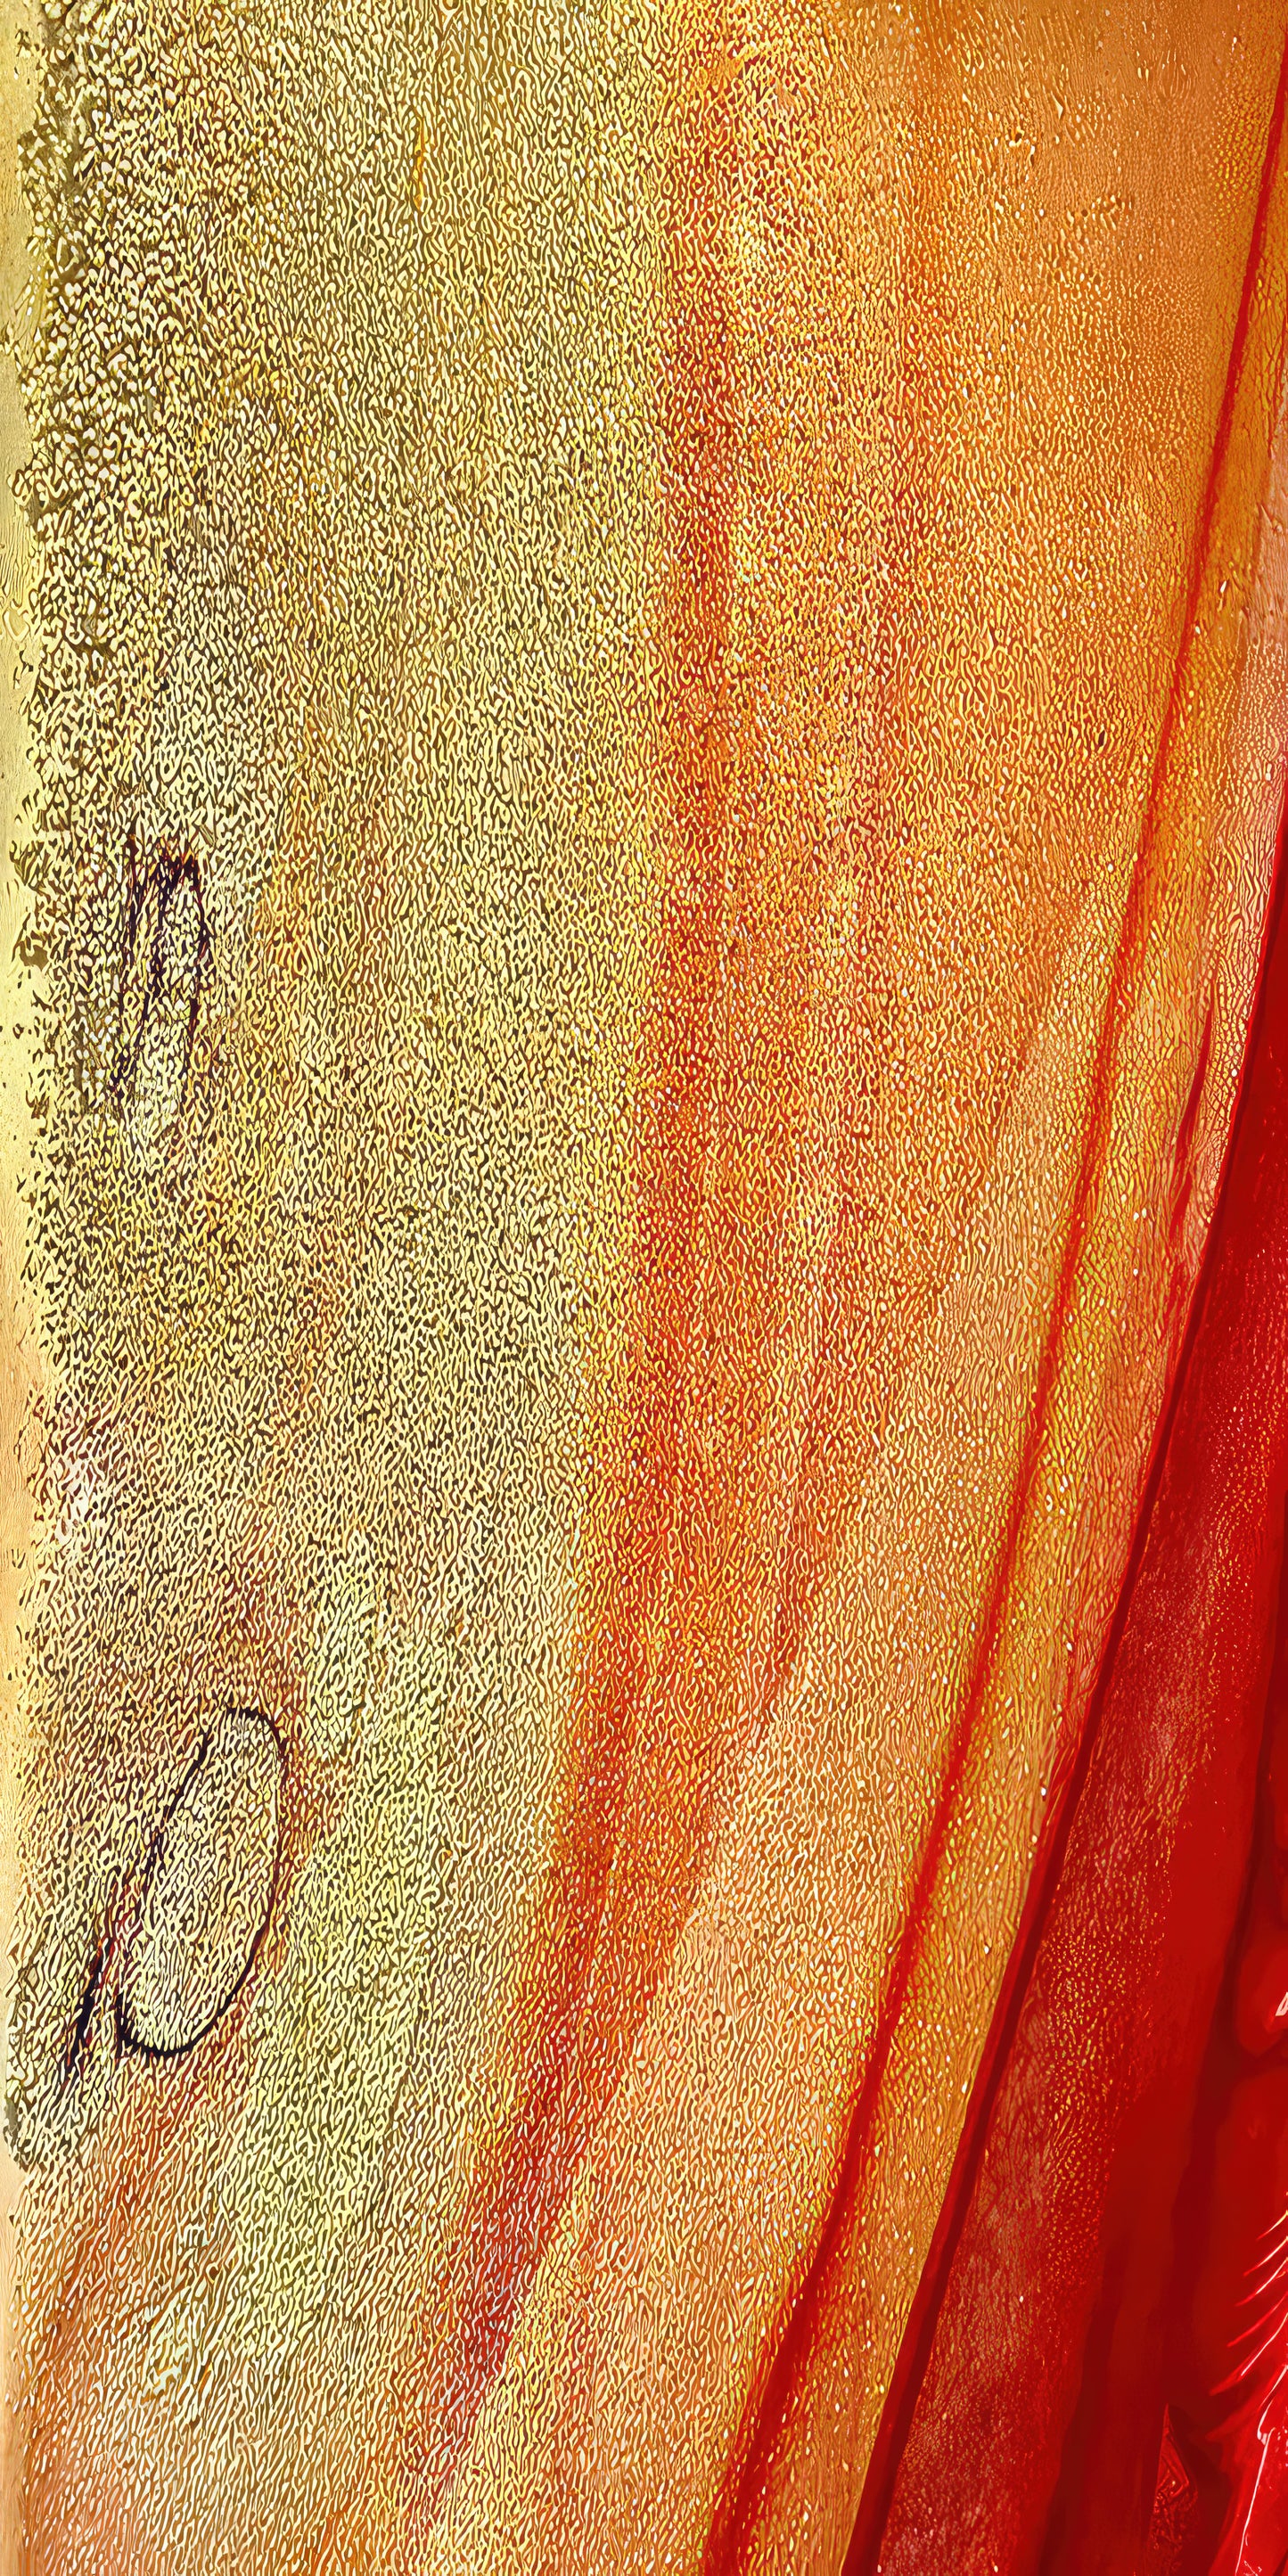 Long Scarf : F & C Color Red and Yellow Oxide,  Dispersing in Croom Acrylic House Paint,  Original Color